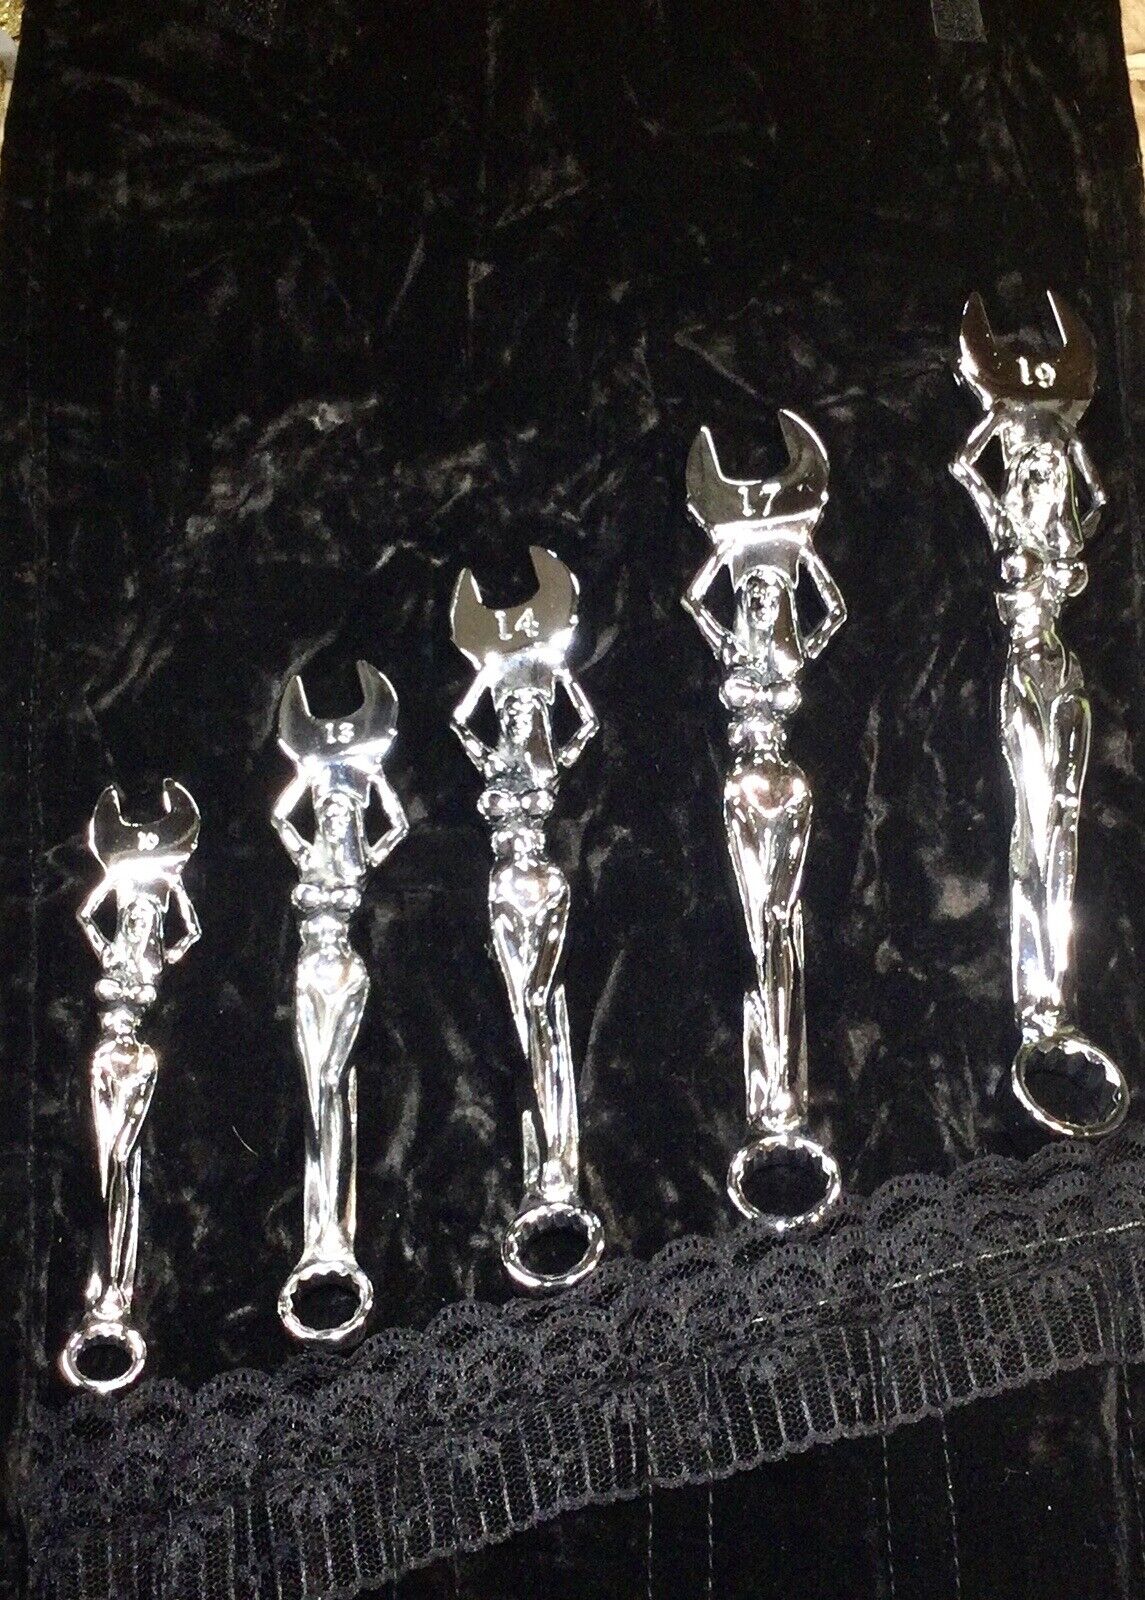 NO FEAR NAKED NUDE LADY WRENCH SET CHROME RARE UNUSUAL SCARCE COLLECTIBLE HTF